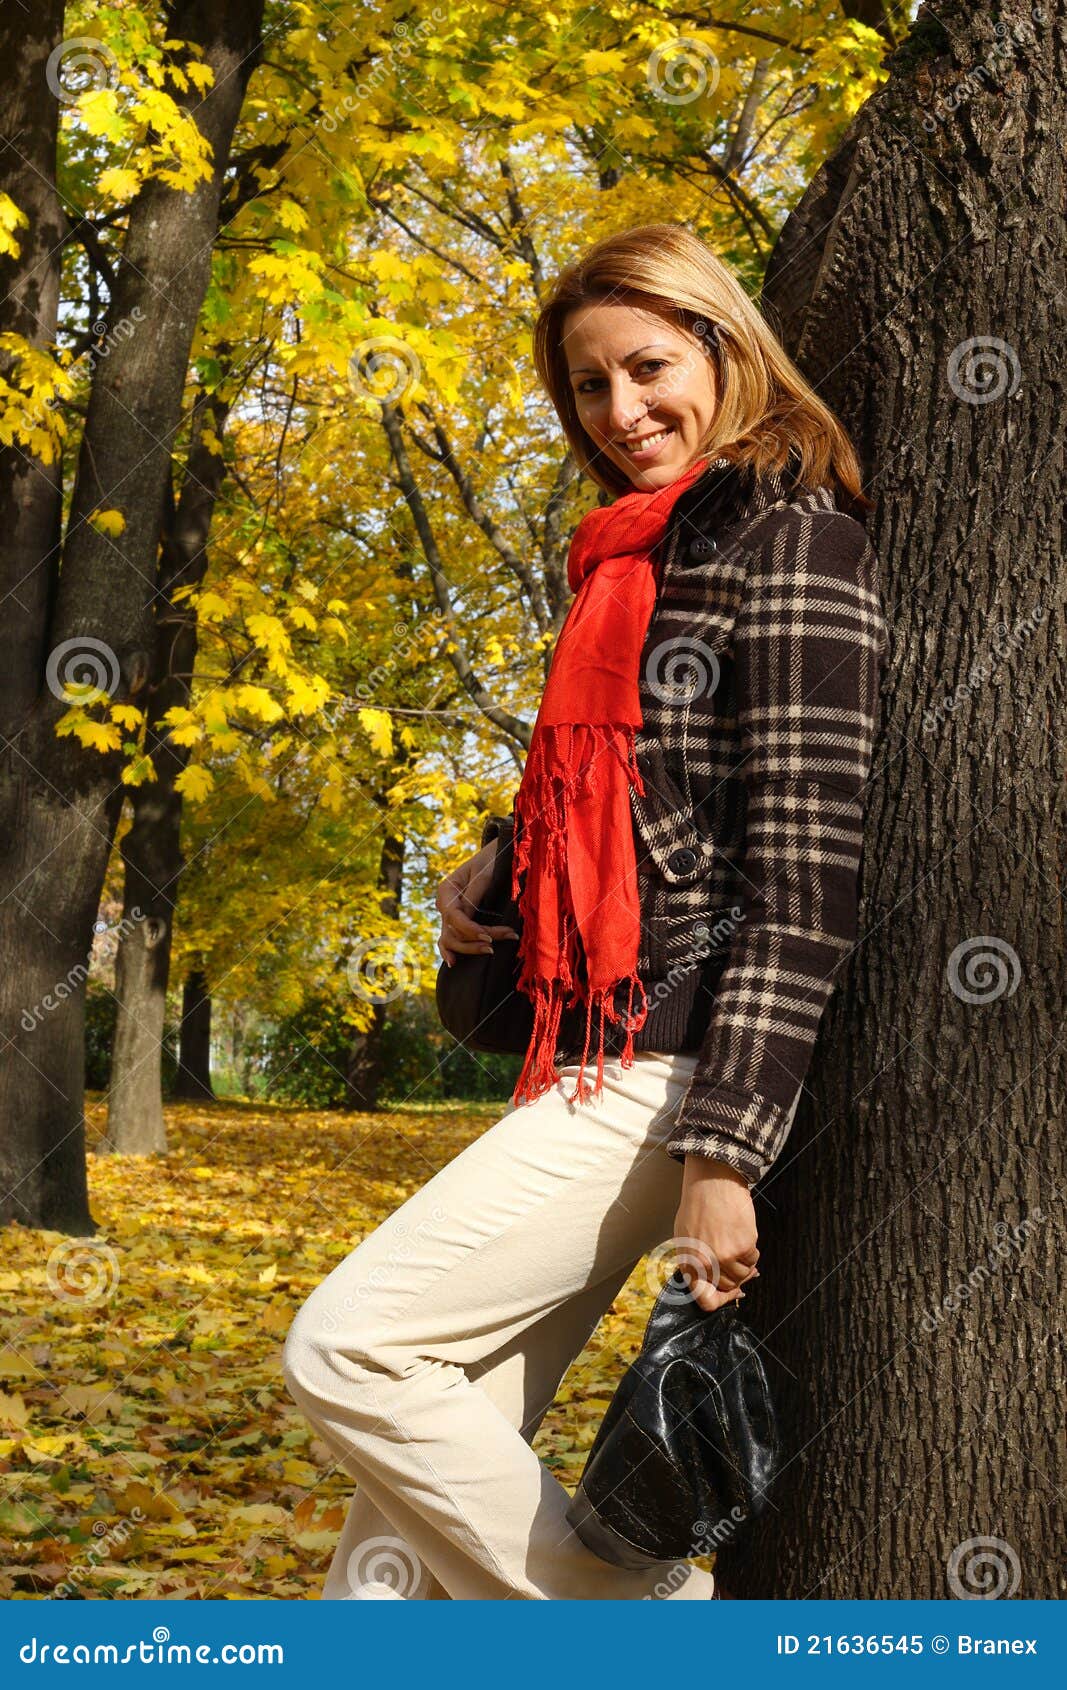 Women in park stock image. Image of pretty, fall, colors - 21636545